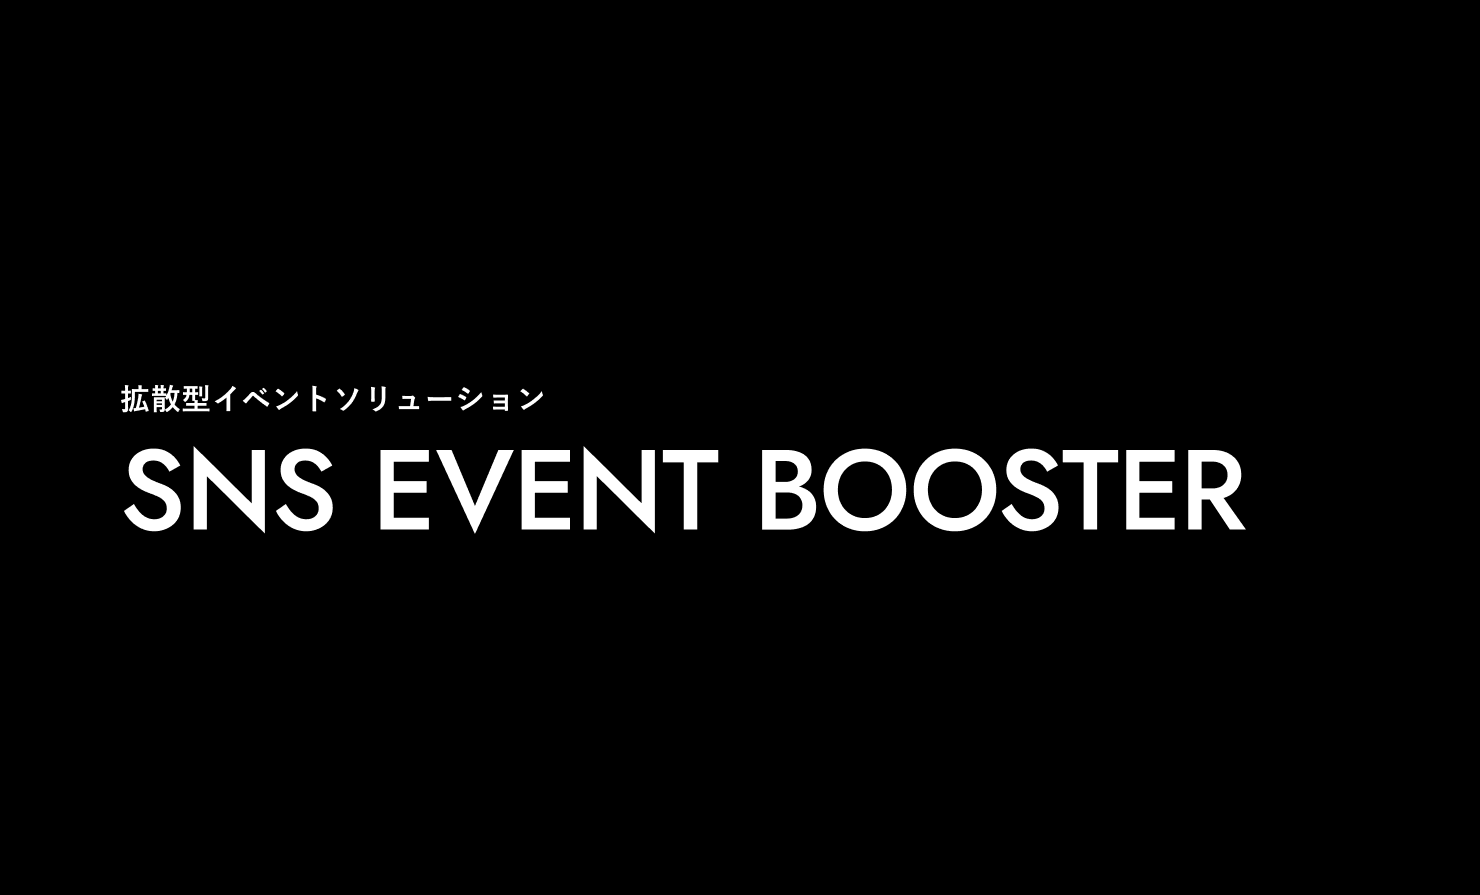 SNS EVENT BOOSTER